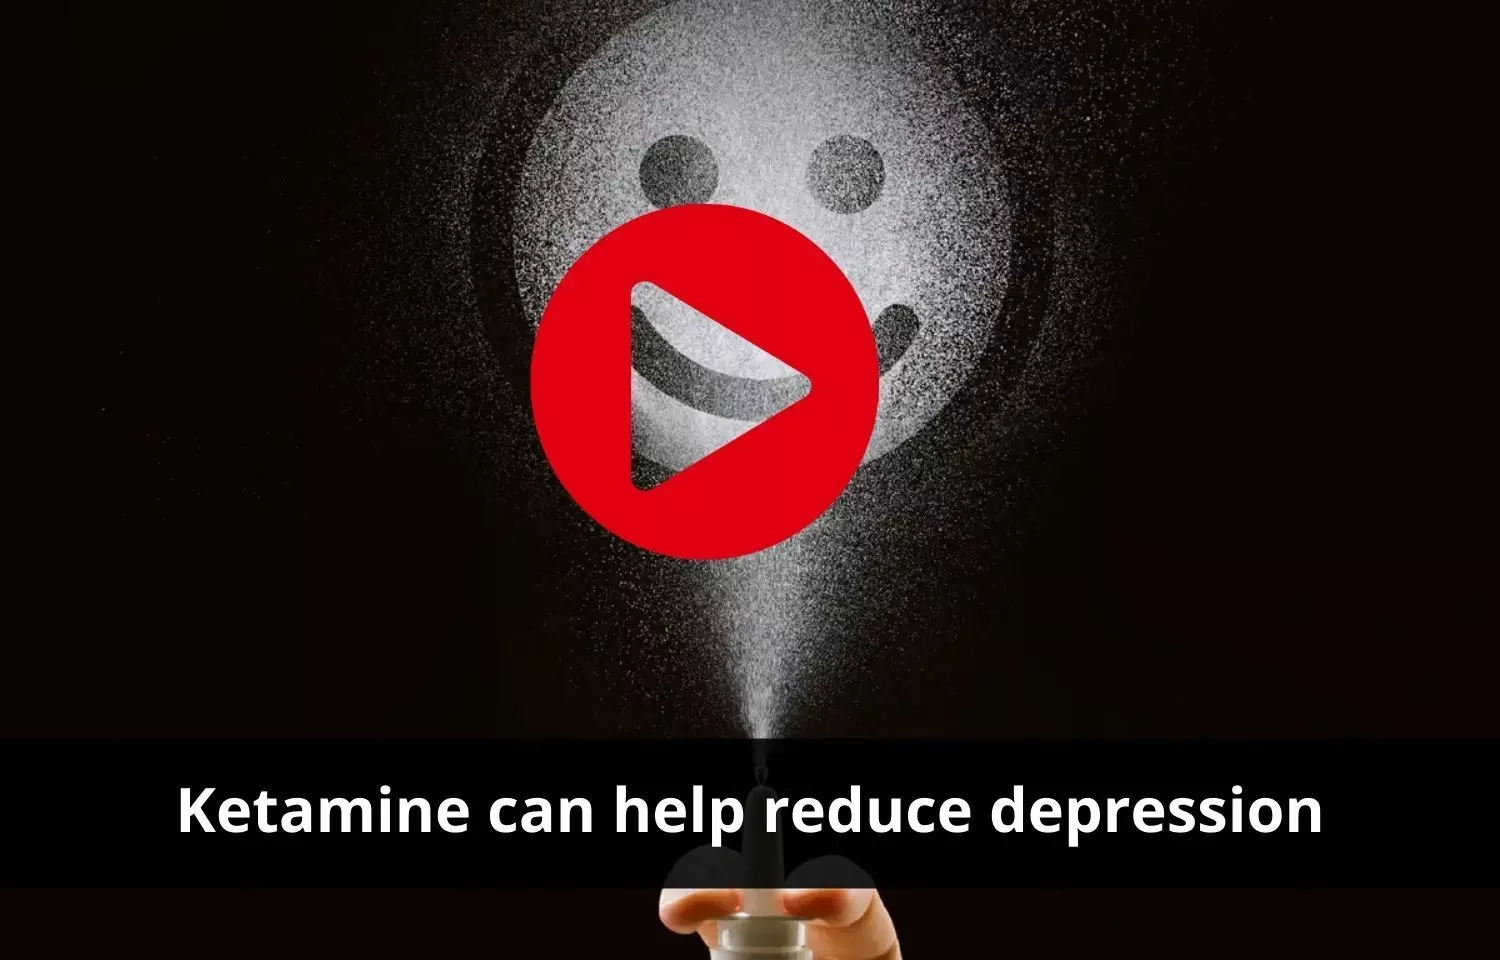 Ketamine to effectively reduce depression and suicidal thoughts